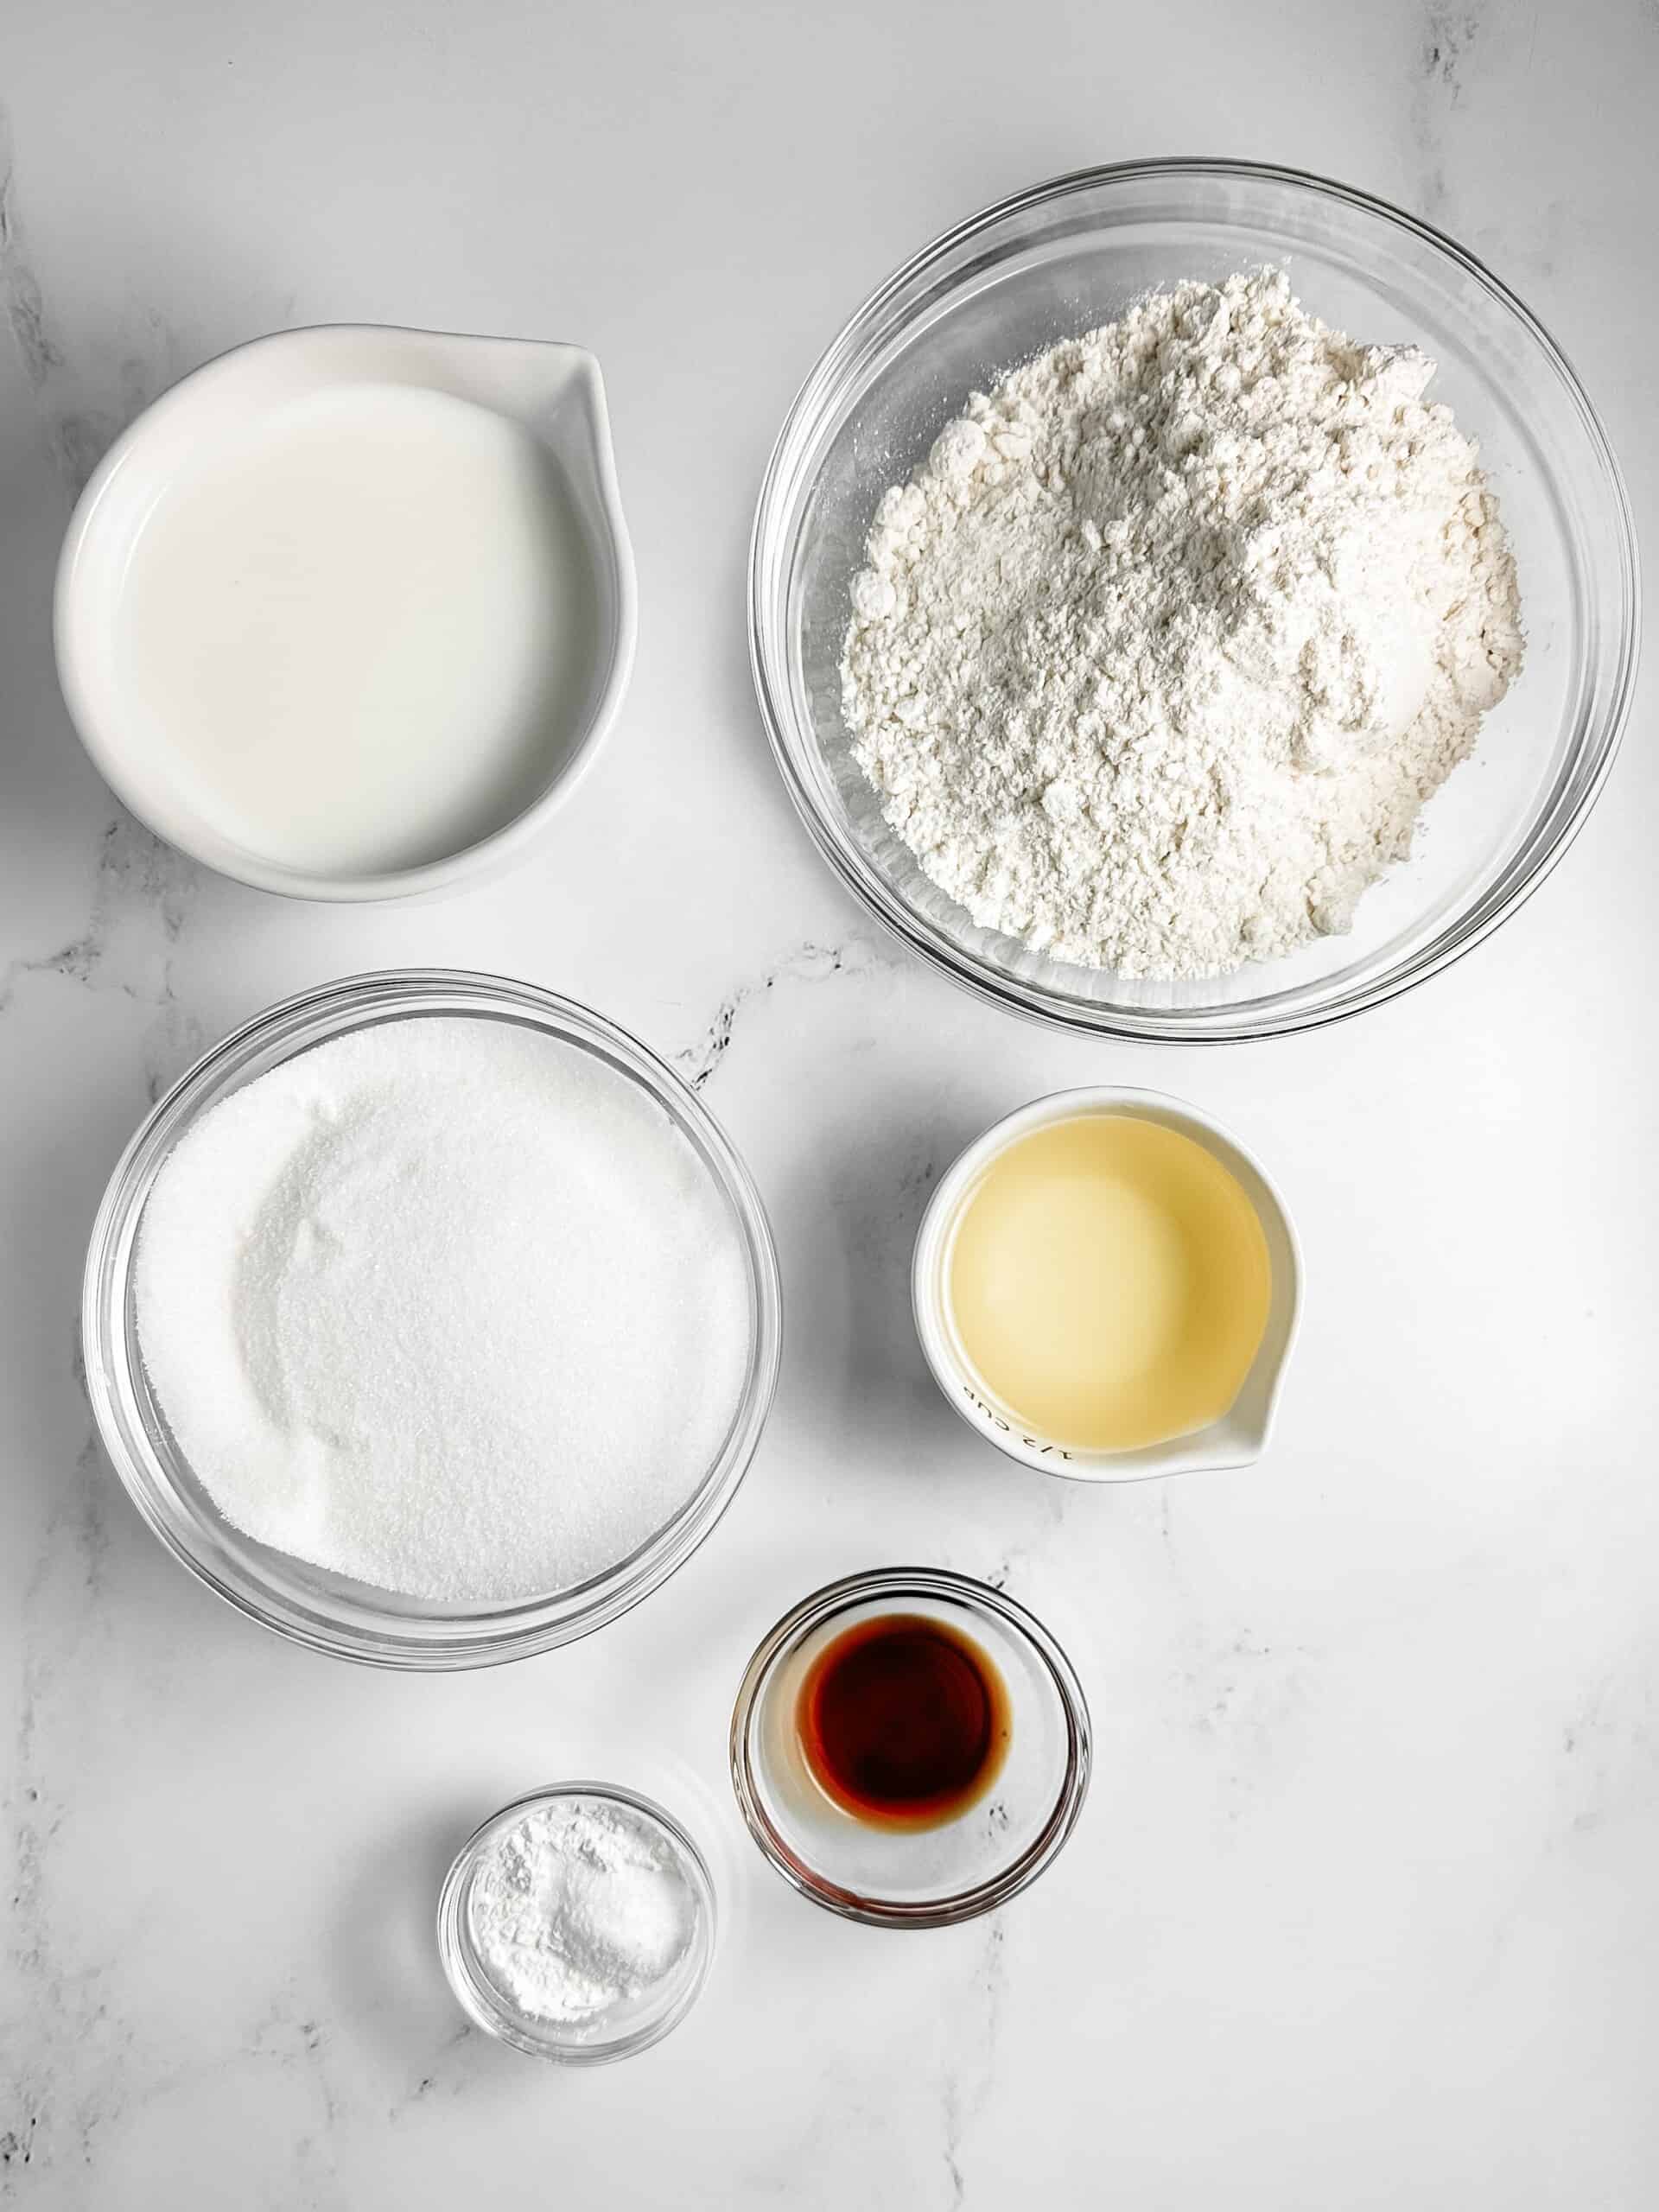 Ingredients for eggless cake.